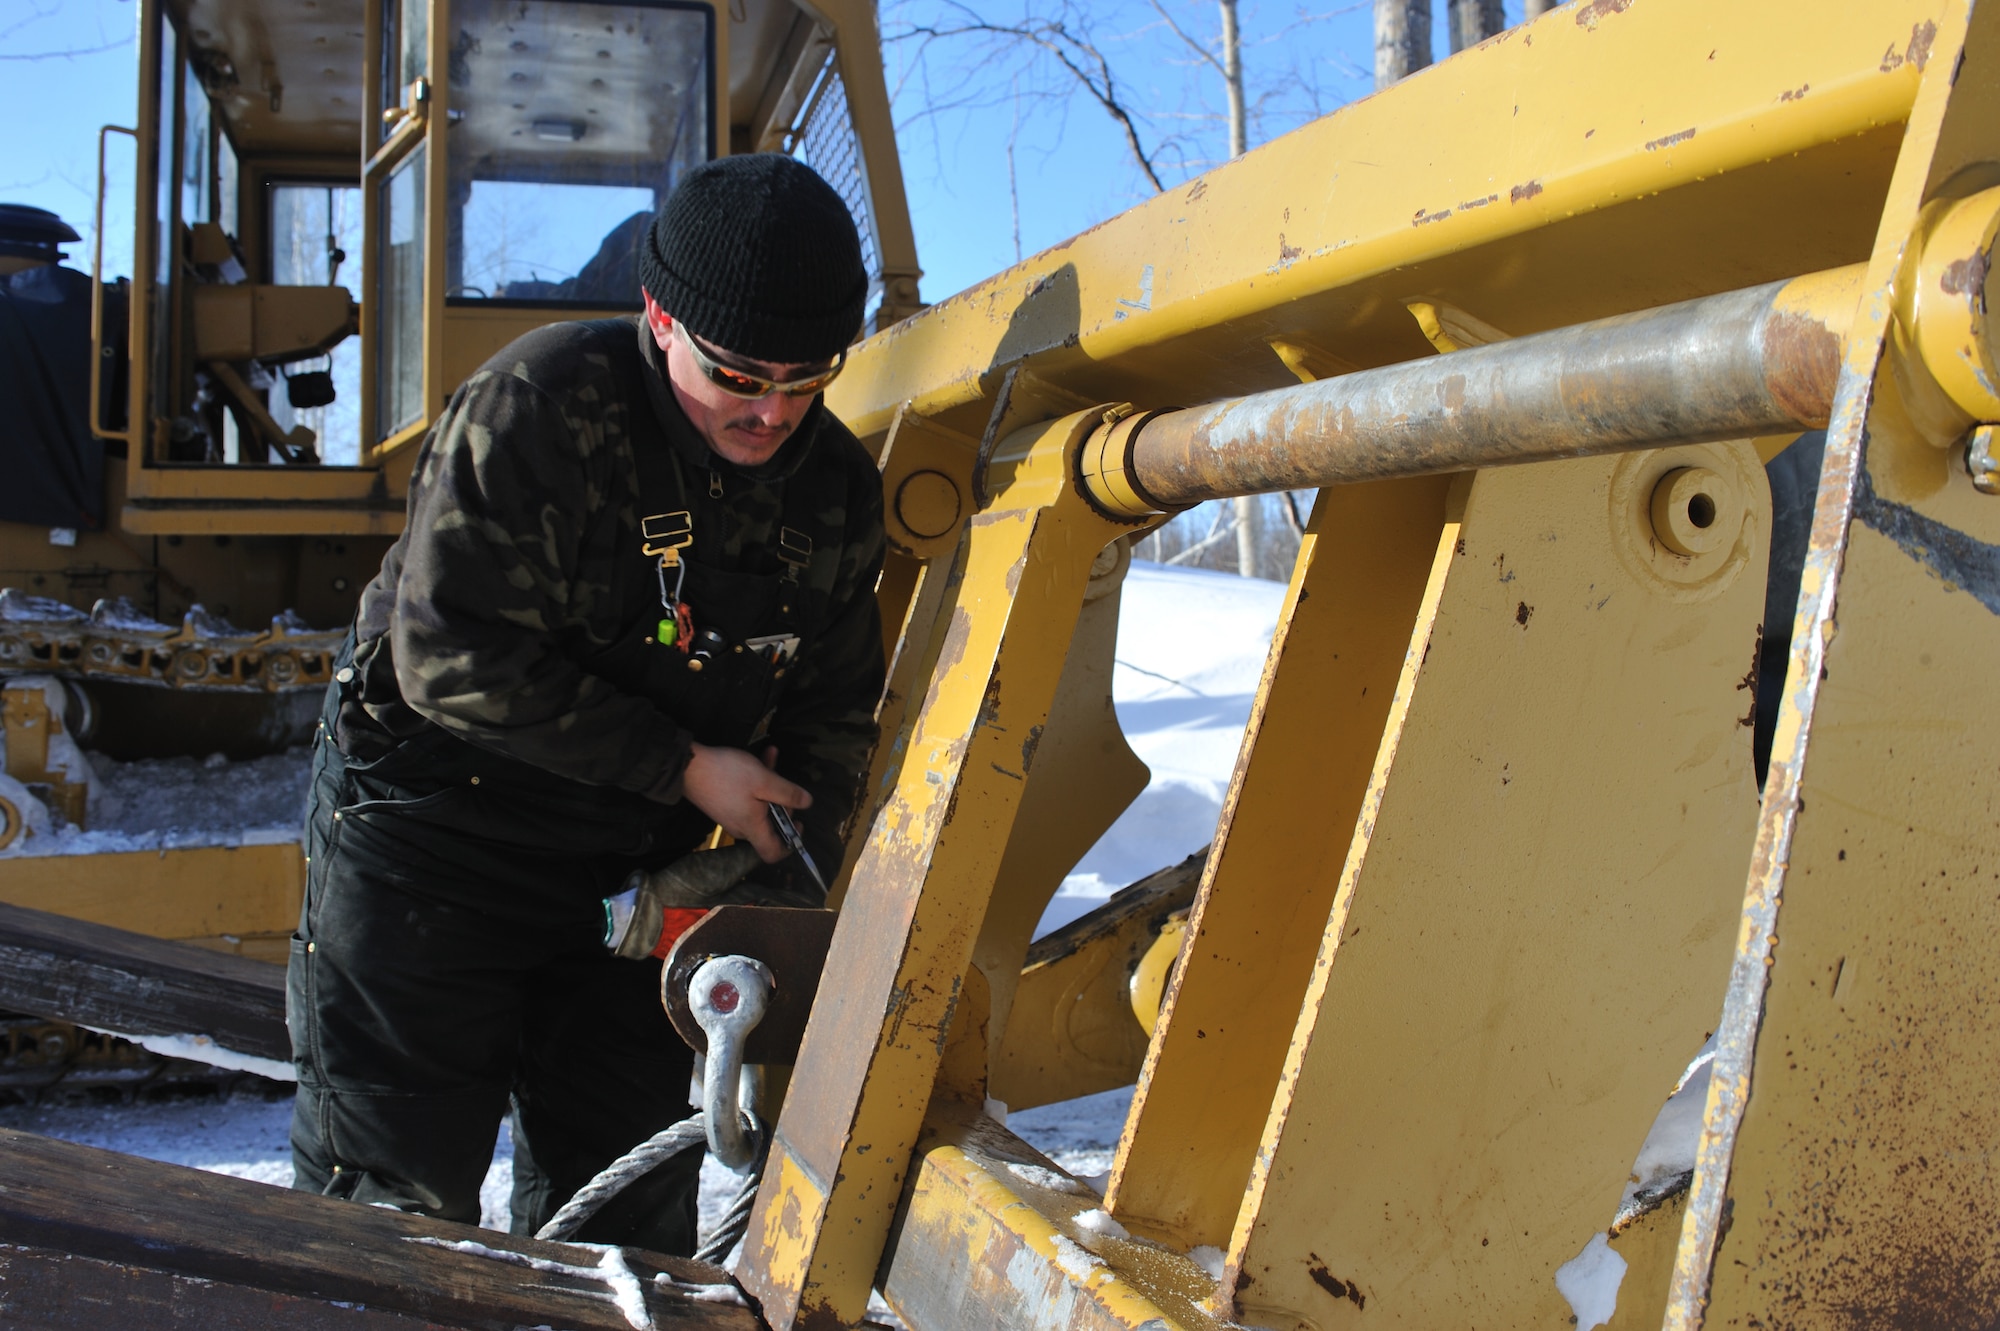 GALENA, Alaska-- Derek Gronlund, a Marsh Creek LLC employee, attaches a shackle to a forklift to pull a cat train full of supplies toward Kalakaket Creek, March 17. Marsh Creek LLC, a contractor for the 611th Civil Engineer Squadron, is building an ice bridge to move supplies for demolition of the former Kalakaket Creek Radio Relay Station that is located 310 miles northwest of Anchorage. The station was built in 1957 and was used to transfer defense communications between White Alice Communication Systems up for demolition because of satellite technology in mid 1970s. (U.S. Air Force photo by Senior Airman Jonathan Steffen)